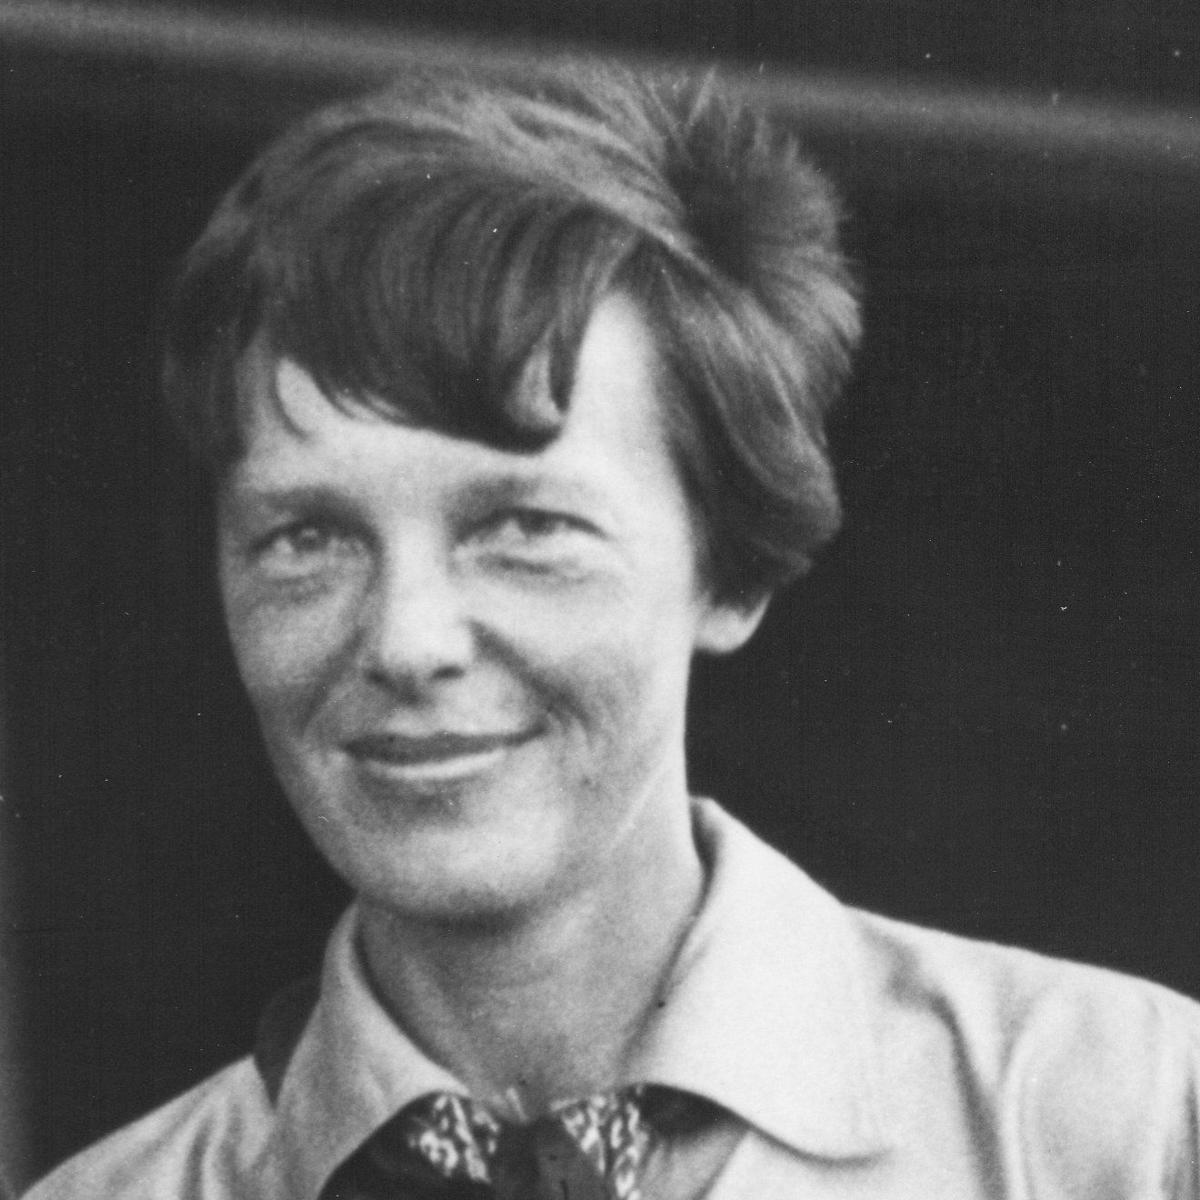 New research suggests Amelia Earhart died as a castaway, not in a plane